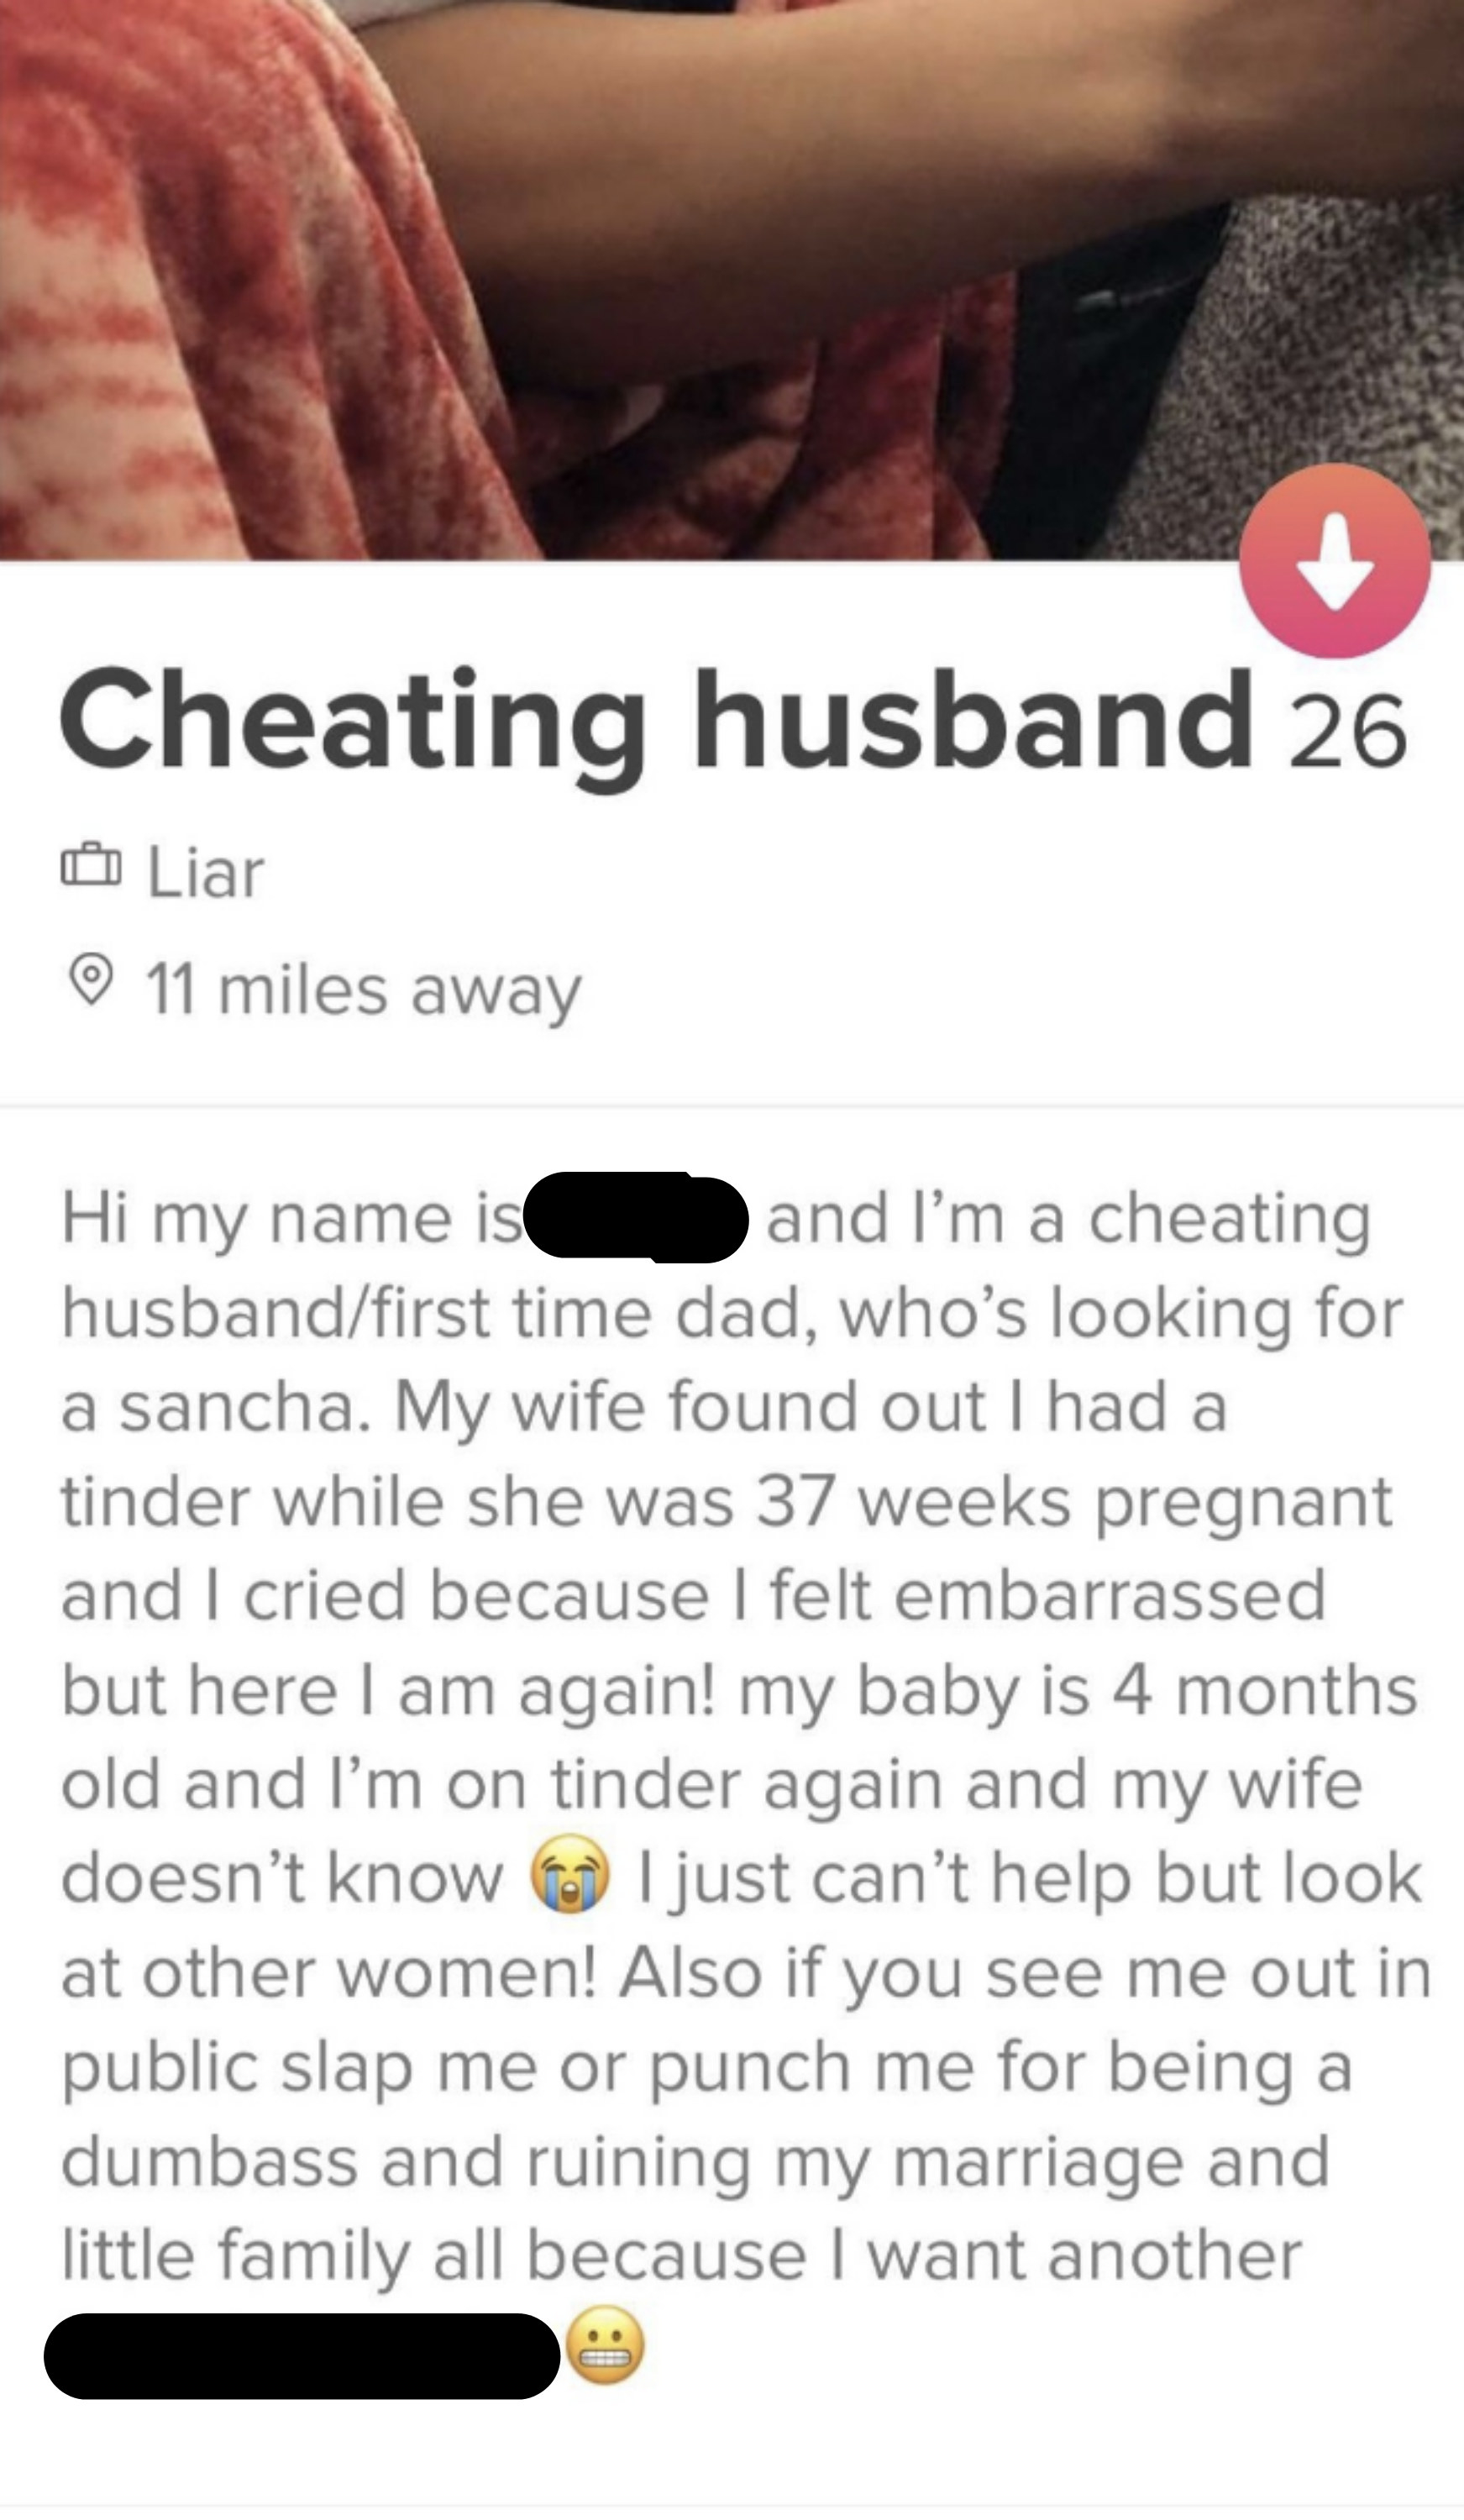 name on tinder is cheating husband